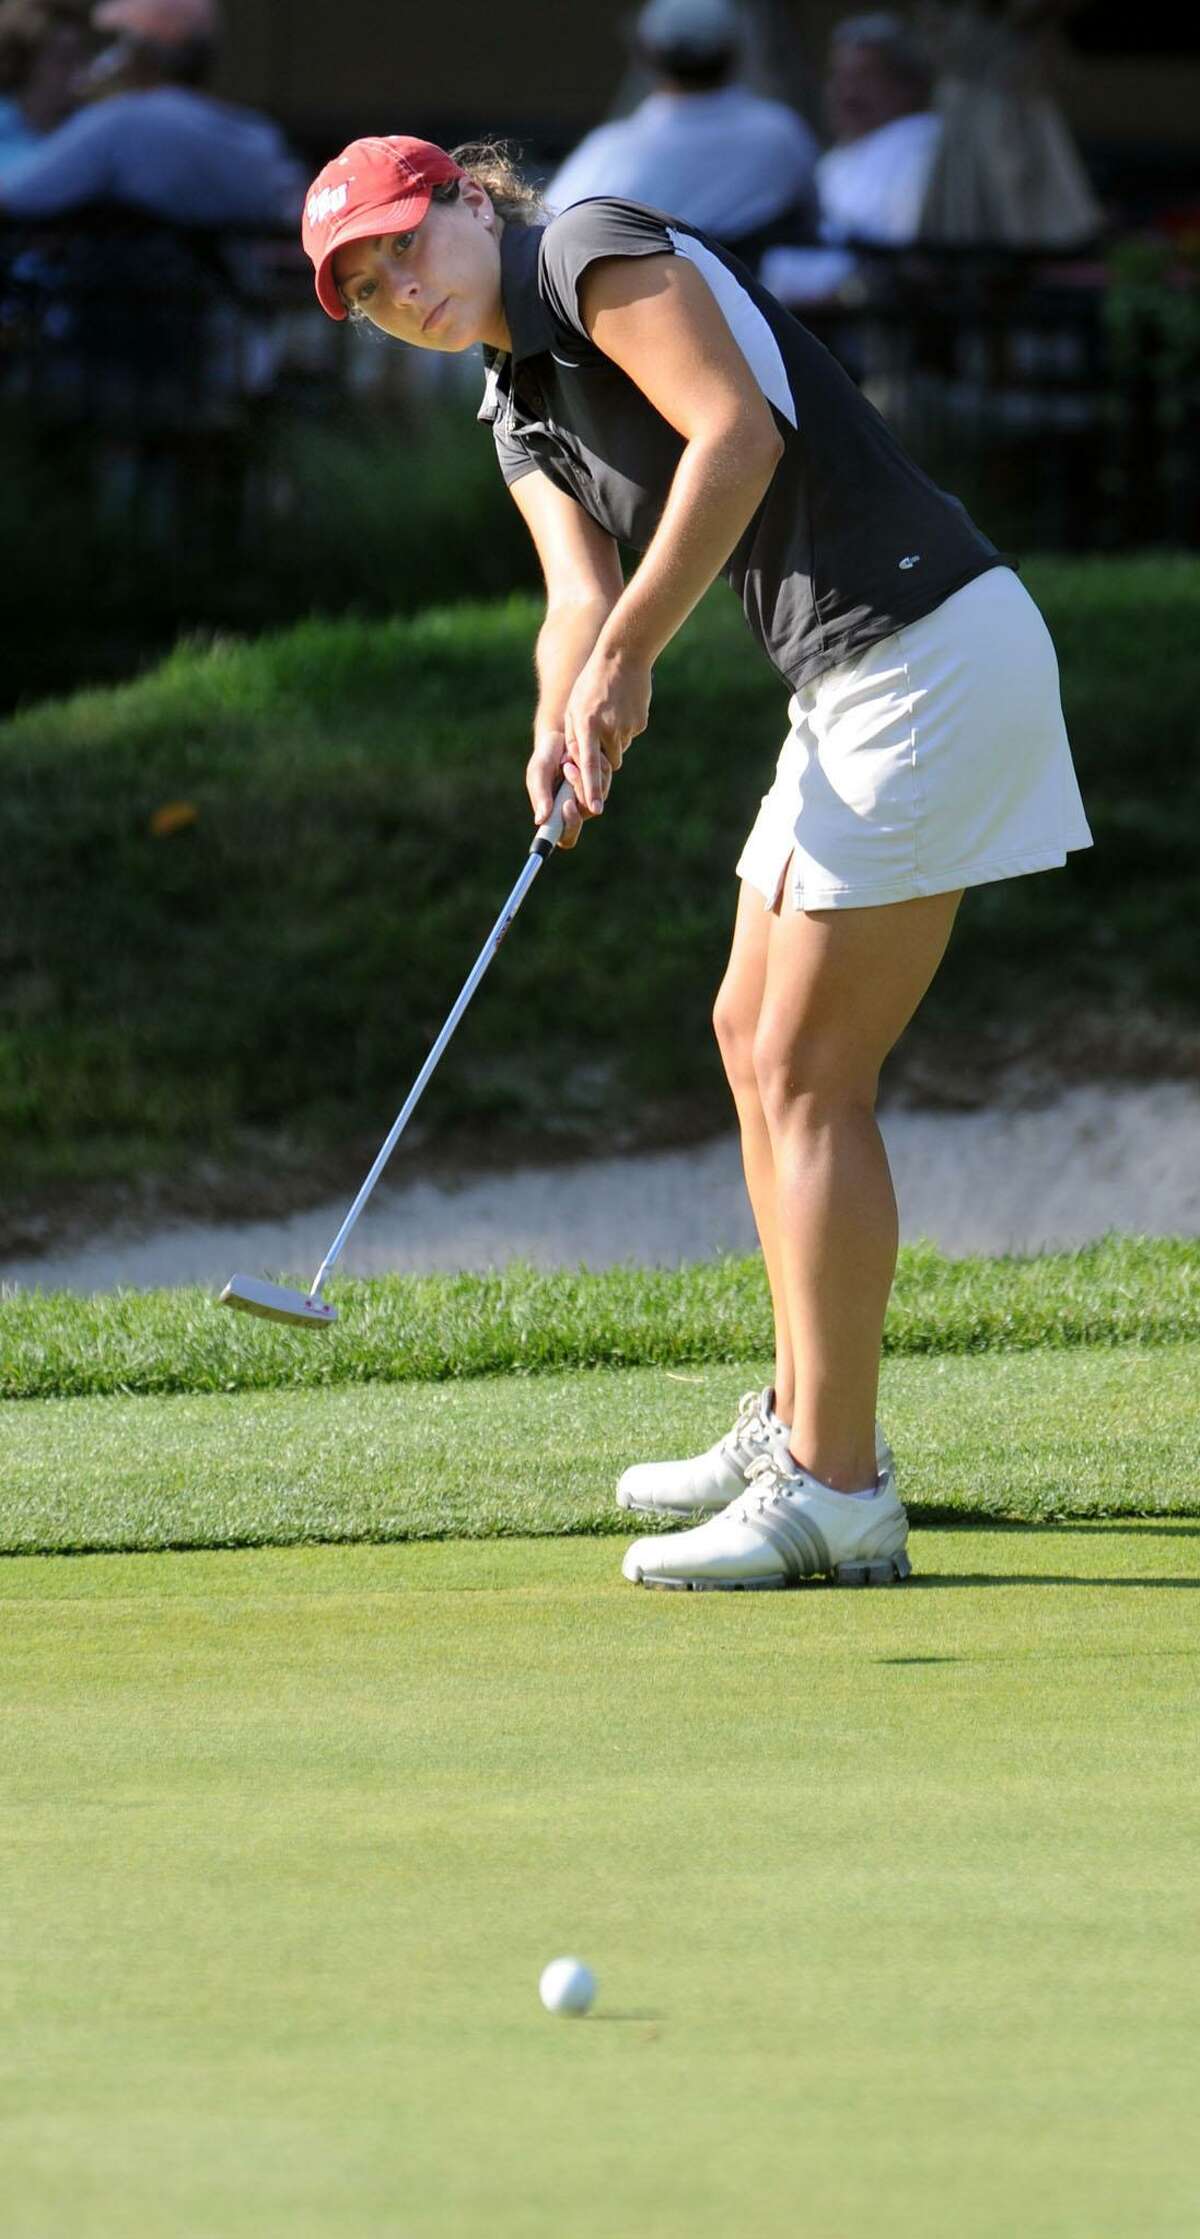 Jen Tierney putts on the 18th hole Sunday during the Danbury Amateur golf championship at Richter Park, July 18, 2010.